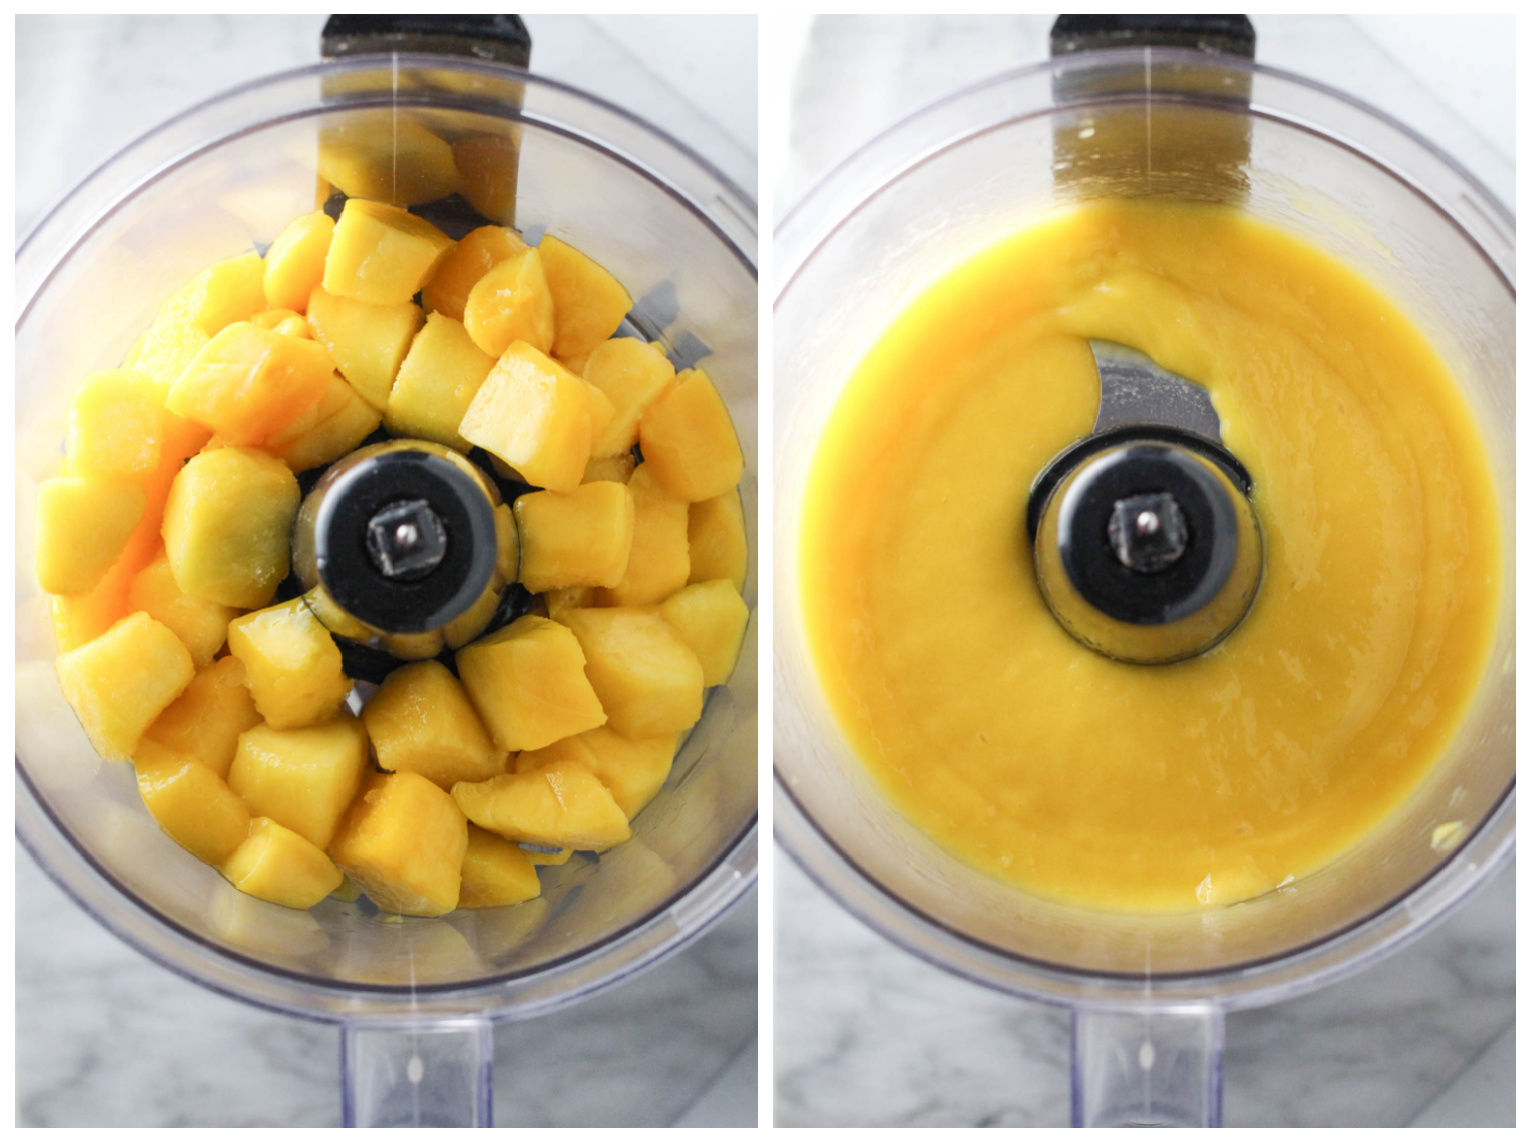 Two side-by-side images. Image on the left: mango chunks in a food processor. Image on the right: pureed mango.